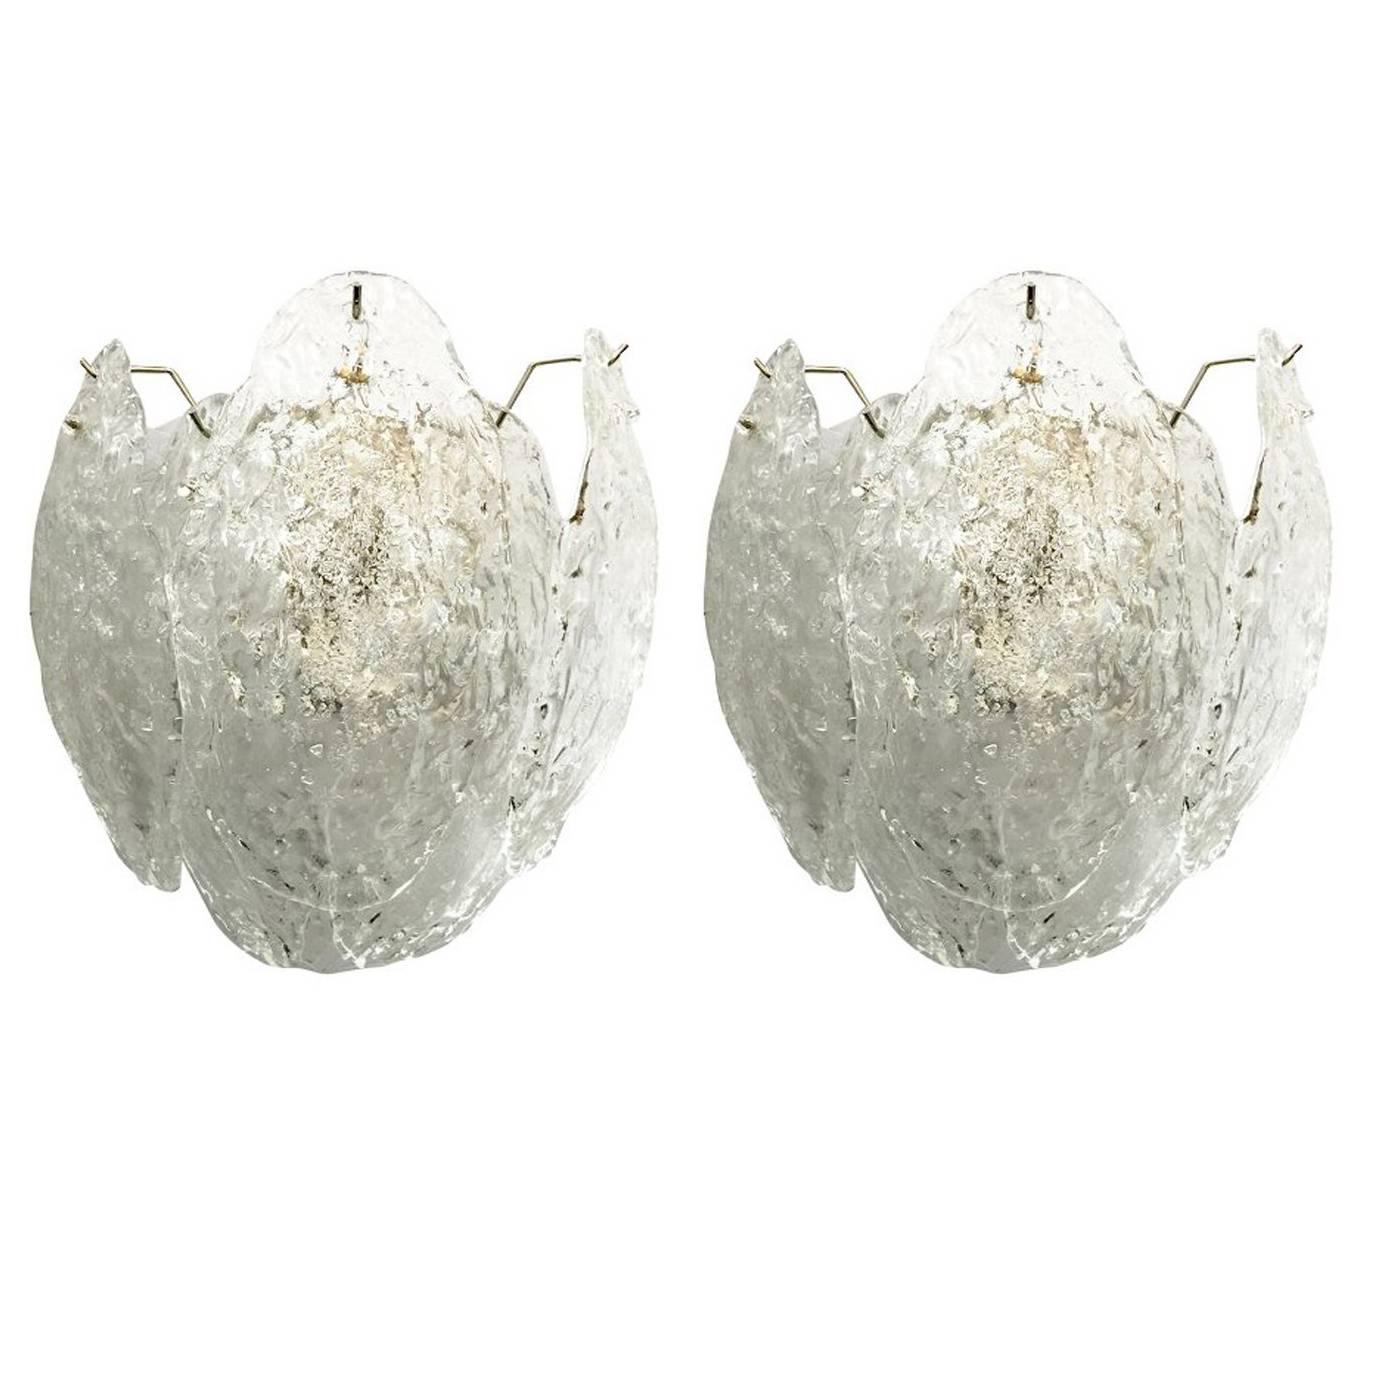 Pair of Leaves Sconces by Mazzega